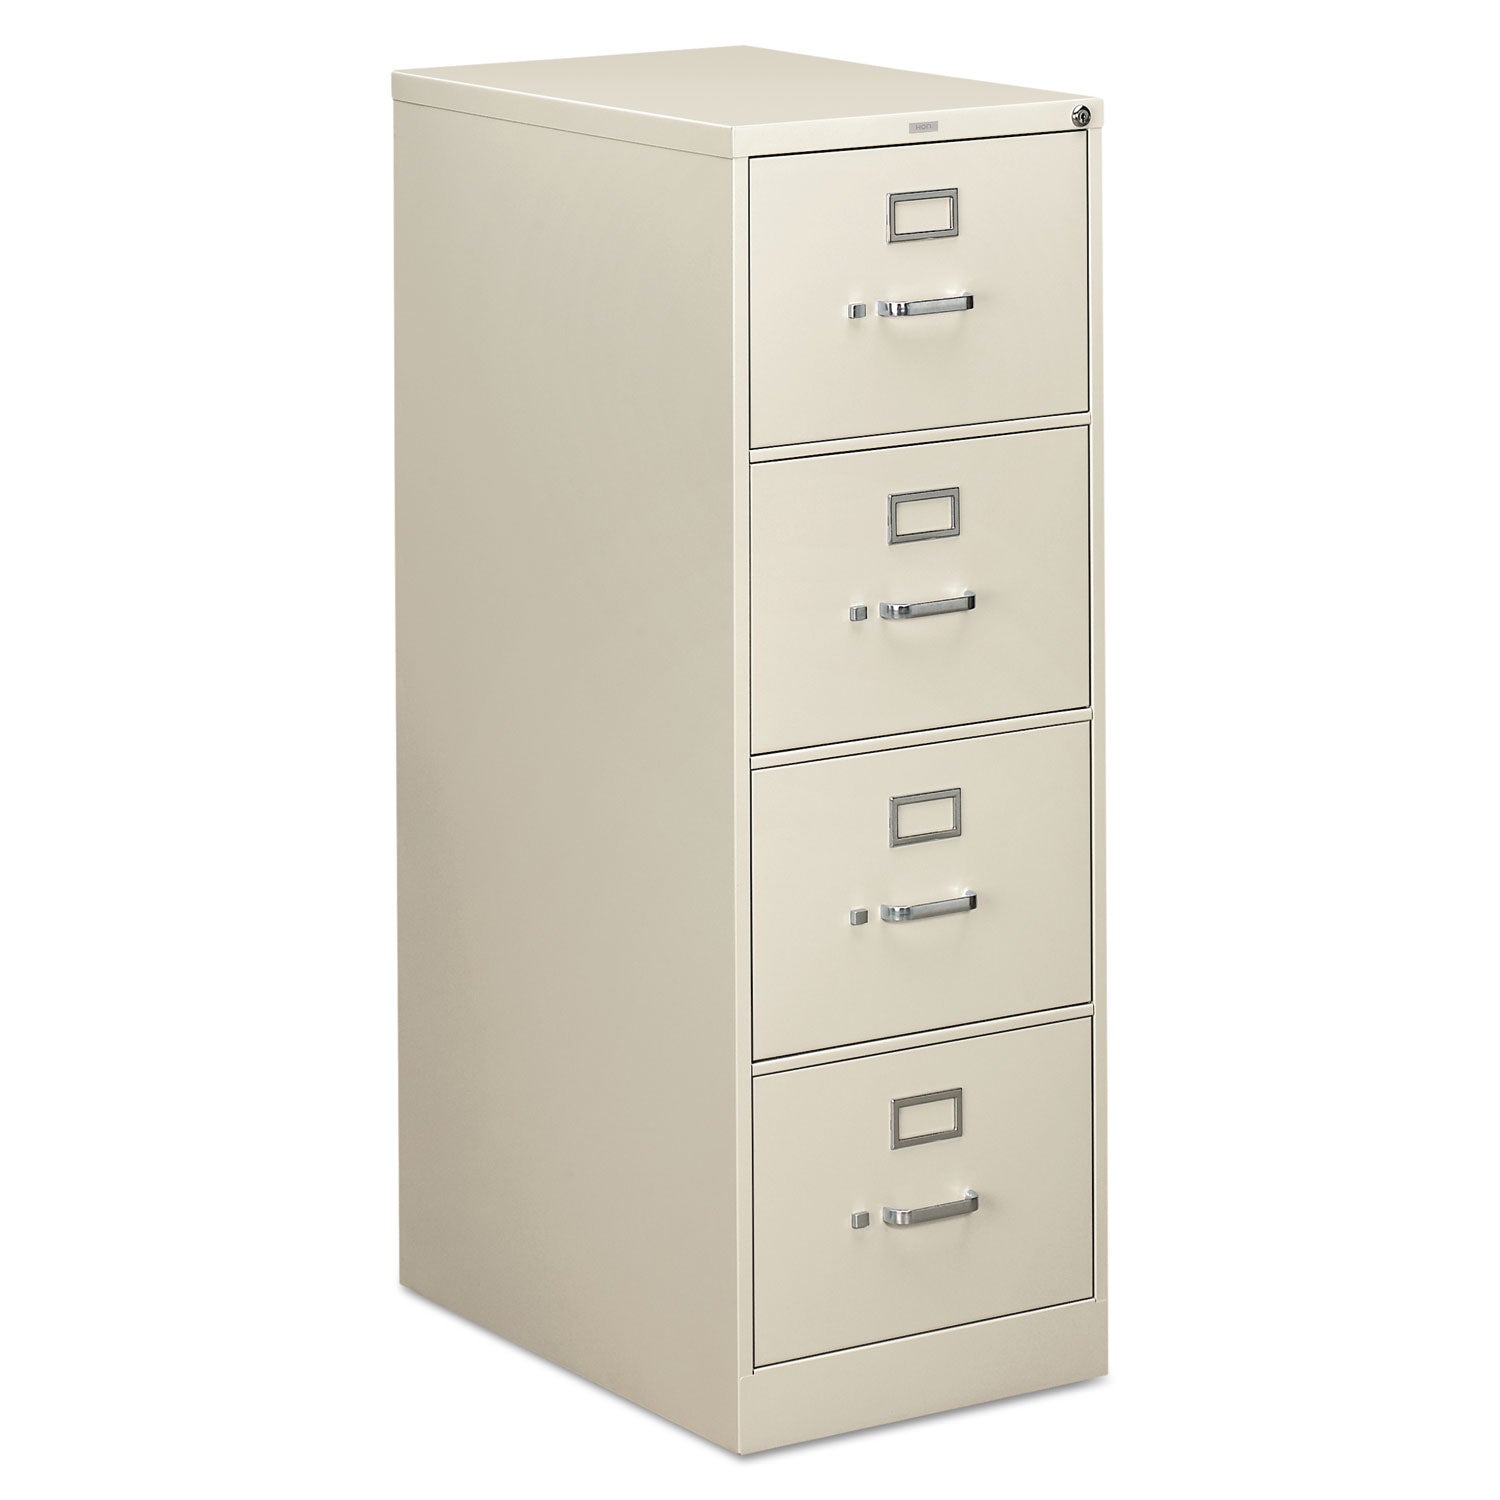 310 Series Vertical File, 4 Legal-Size File Drawers, Light Gray, 18.25" x 26.5" x 52 - 